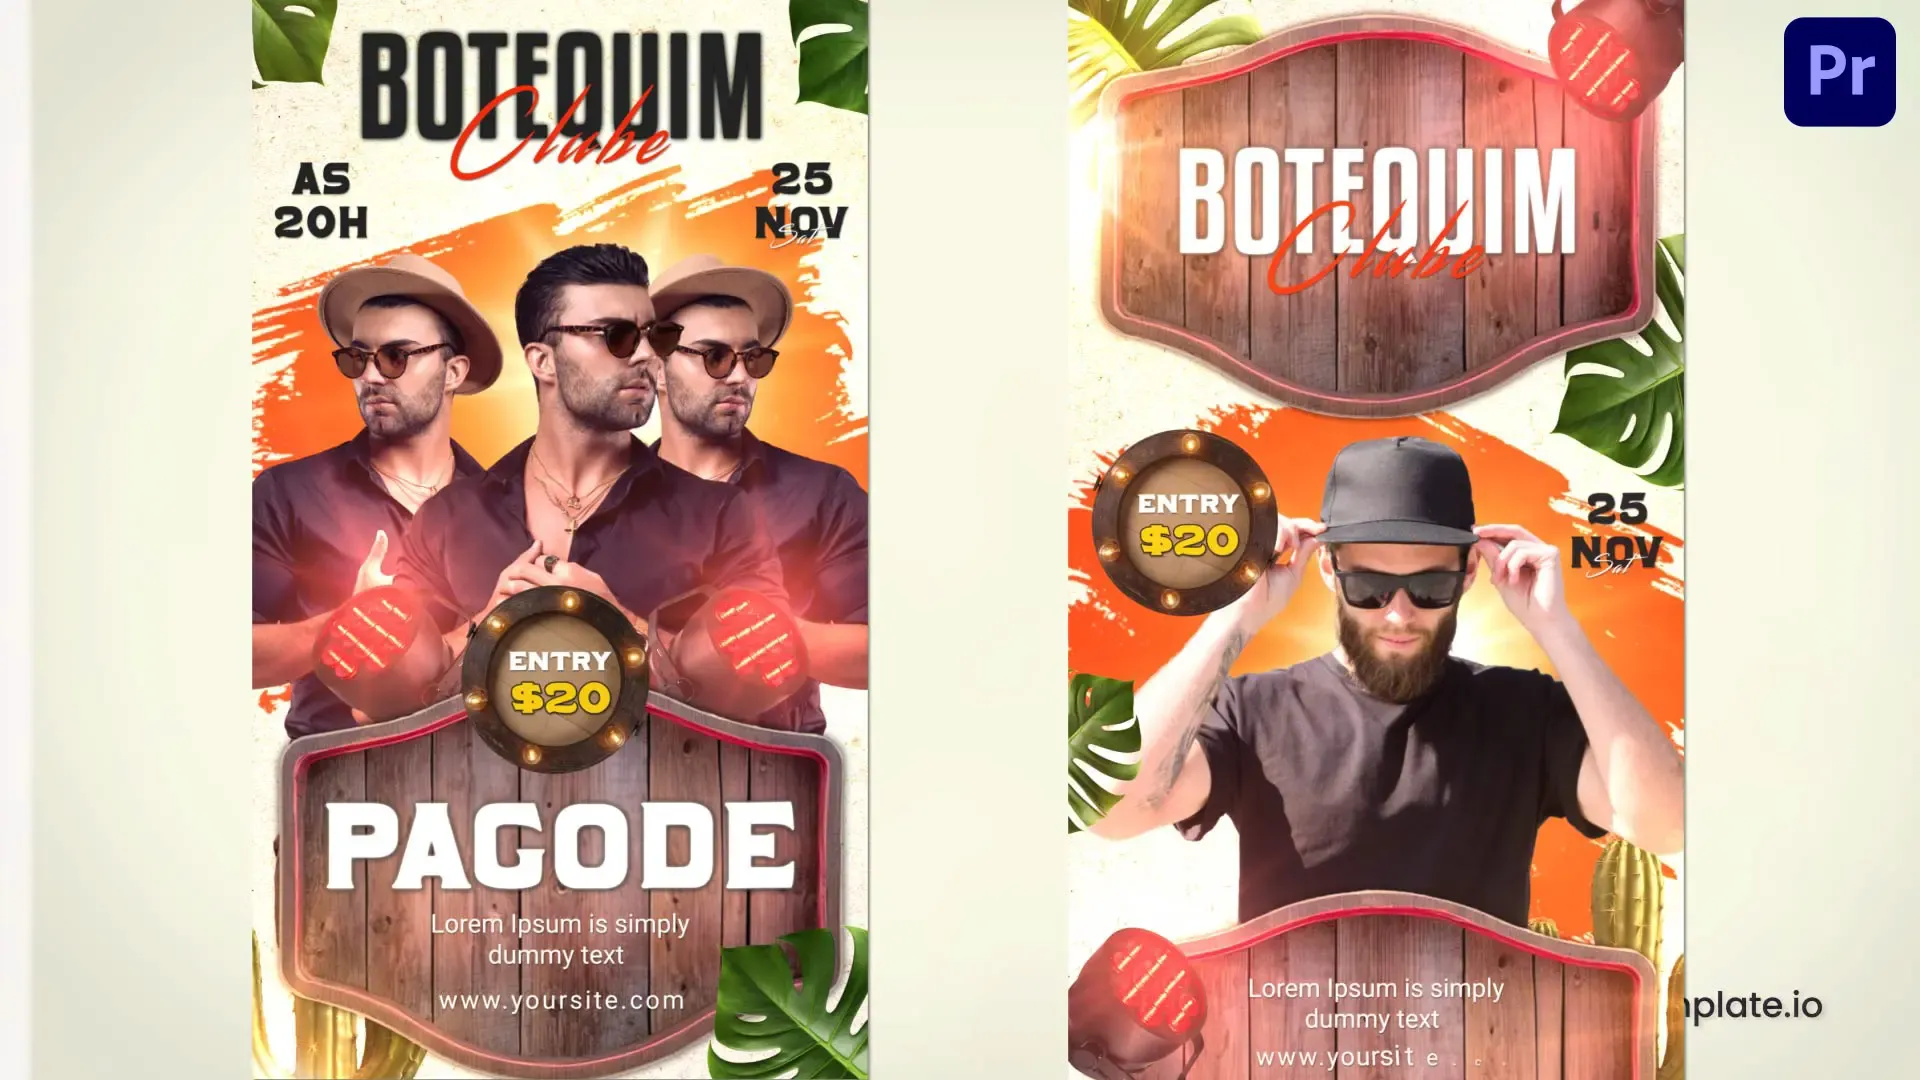 Botequim Club Party Promo Flyer Instagram Story